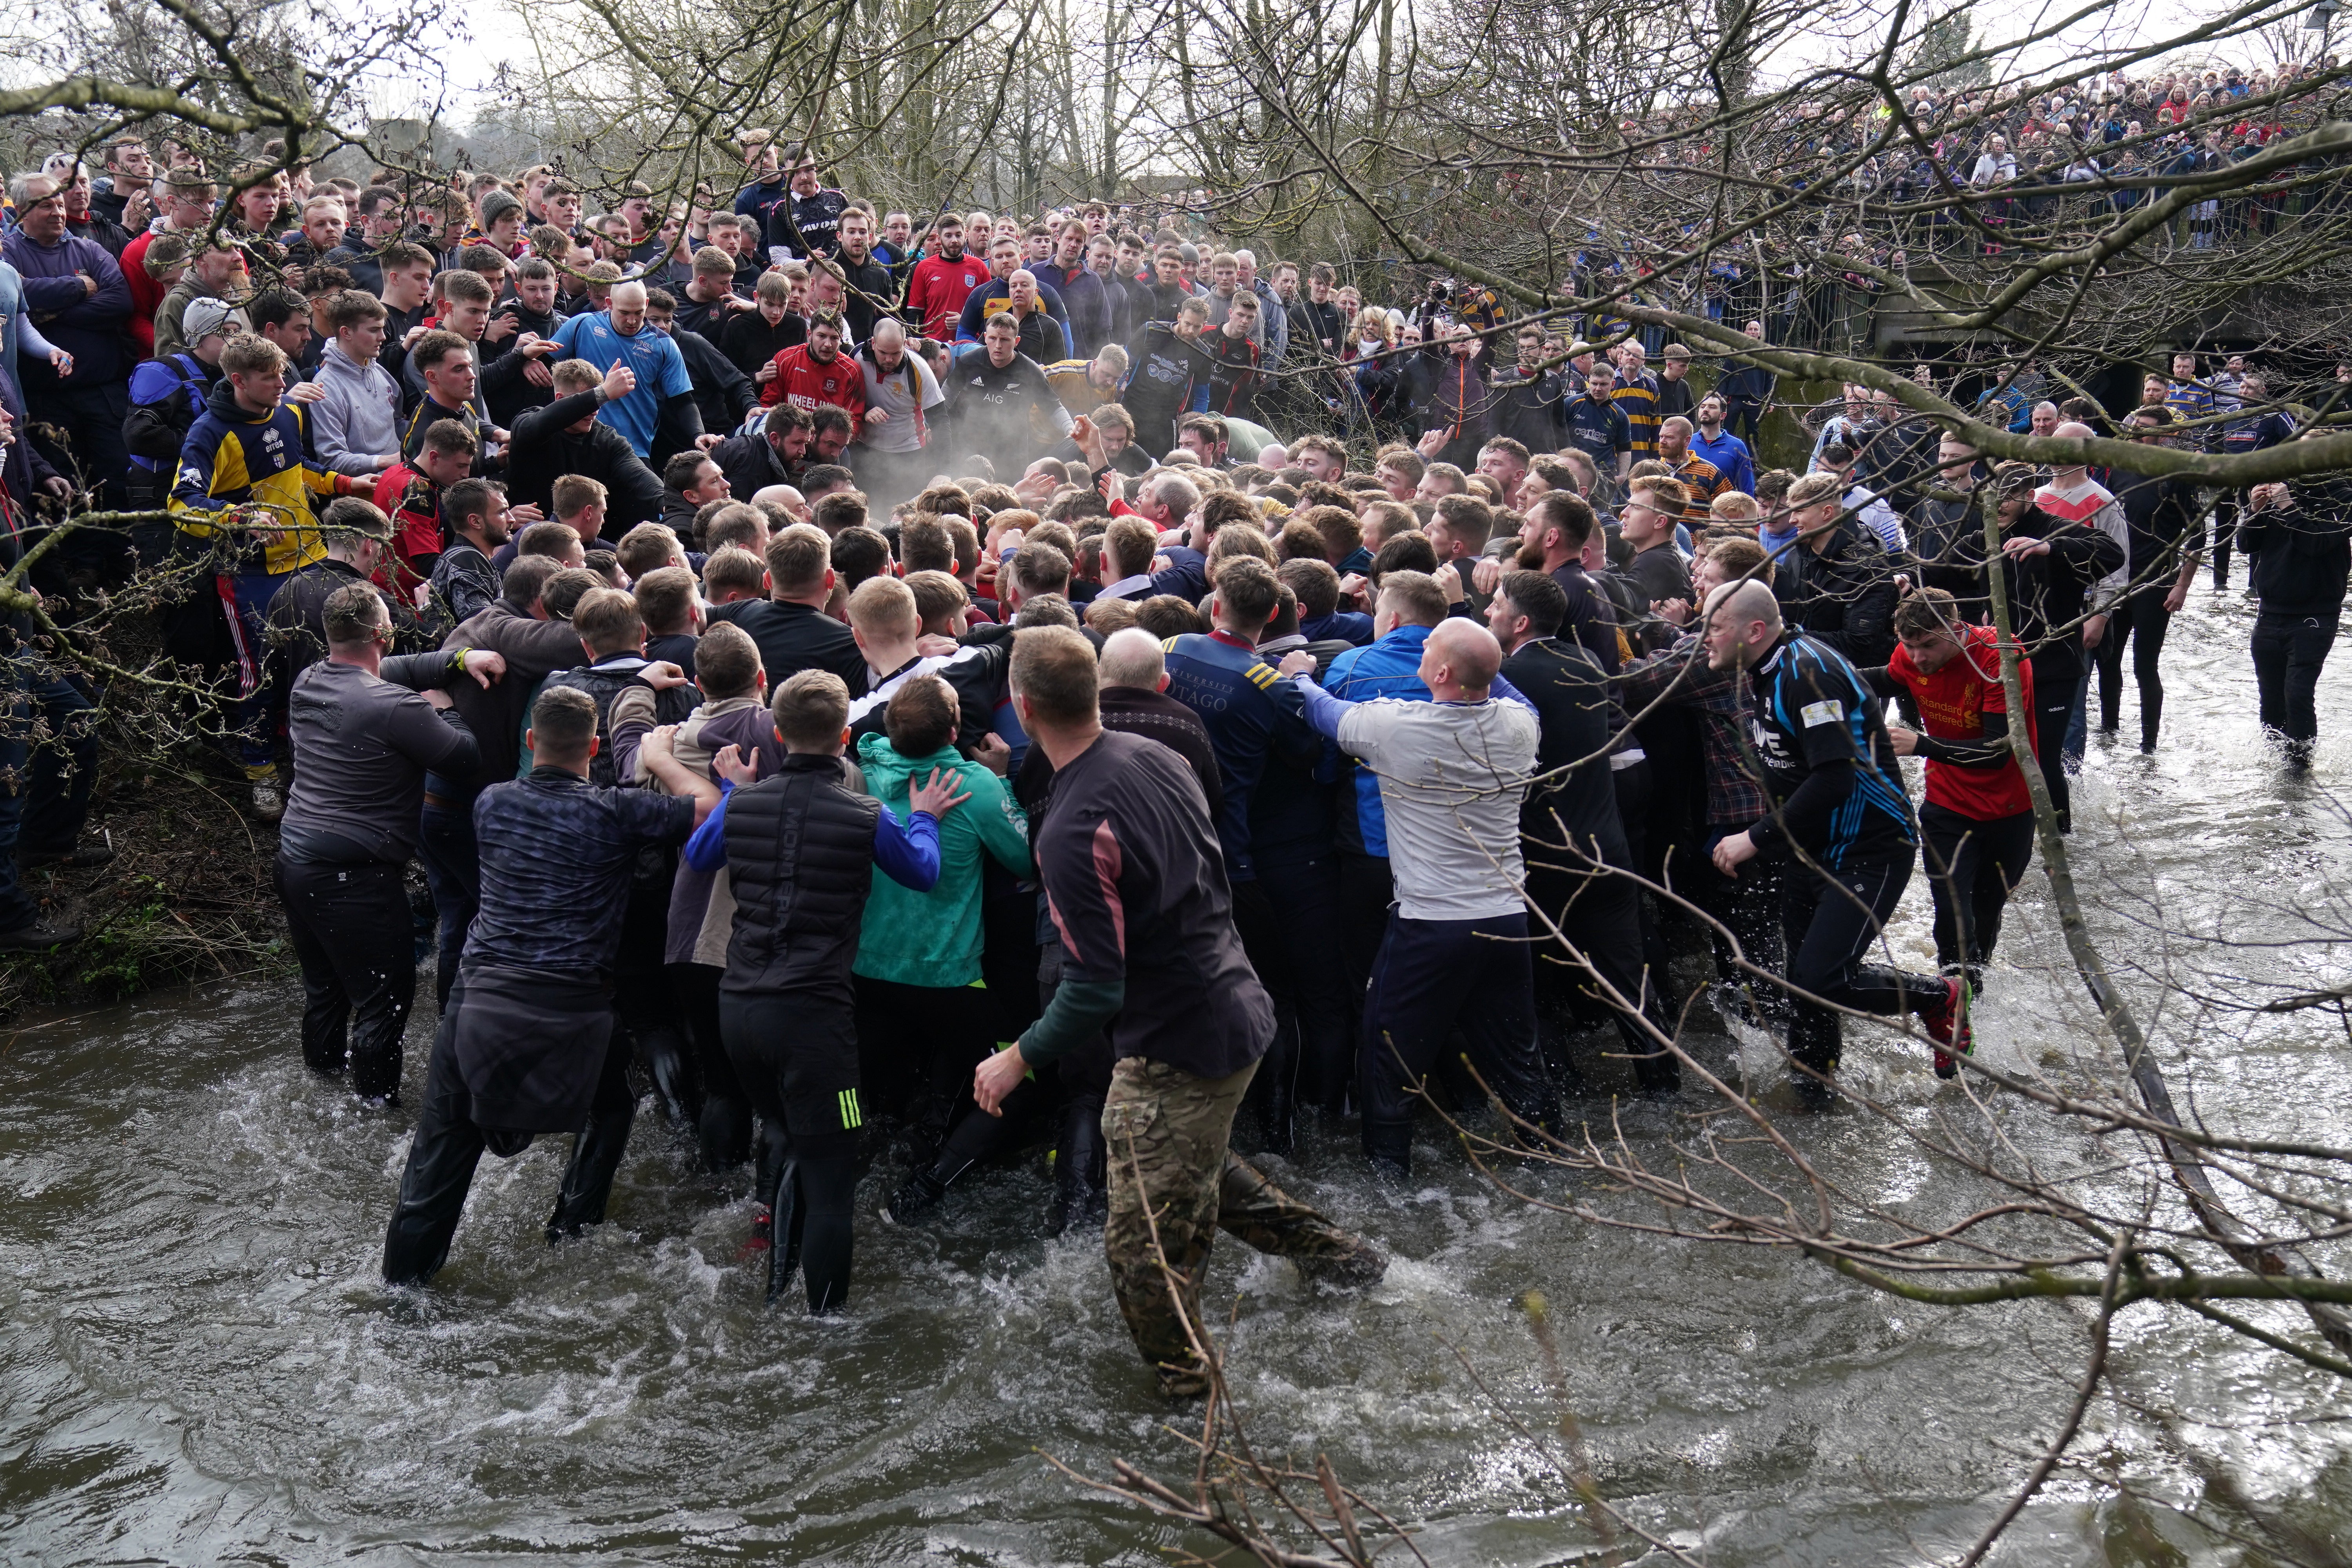 Players take part in the Royal Shrovetide Football Match in Ashbourne (Jacob King/PA)